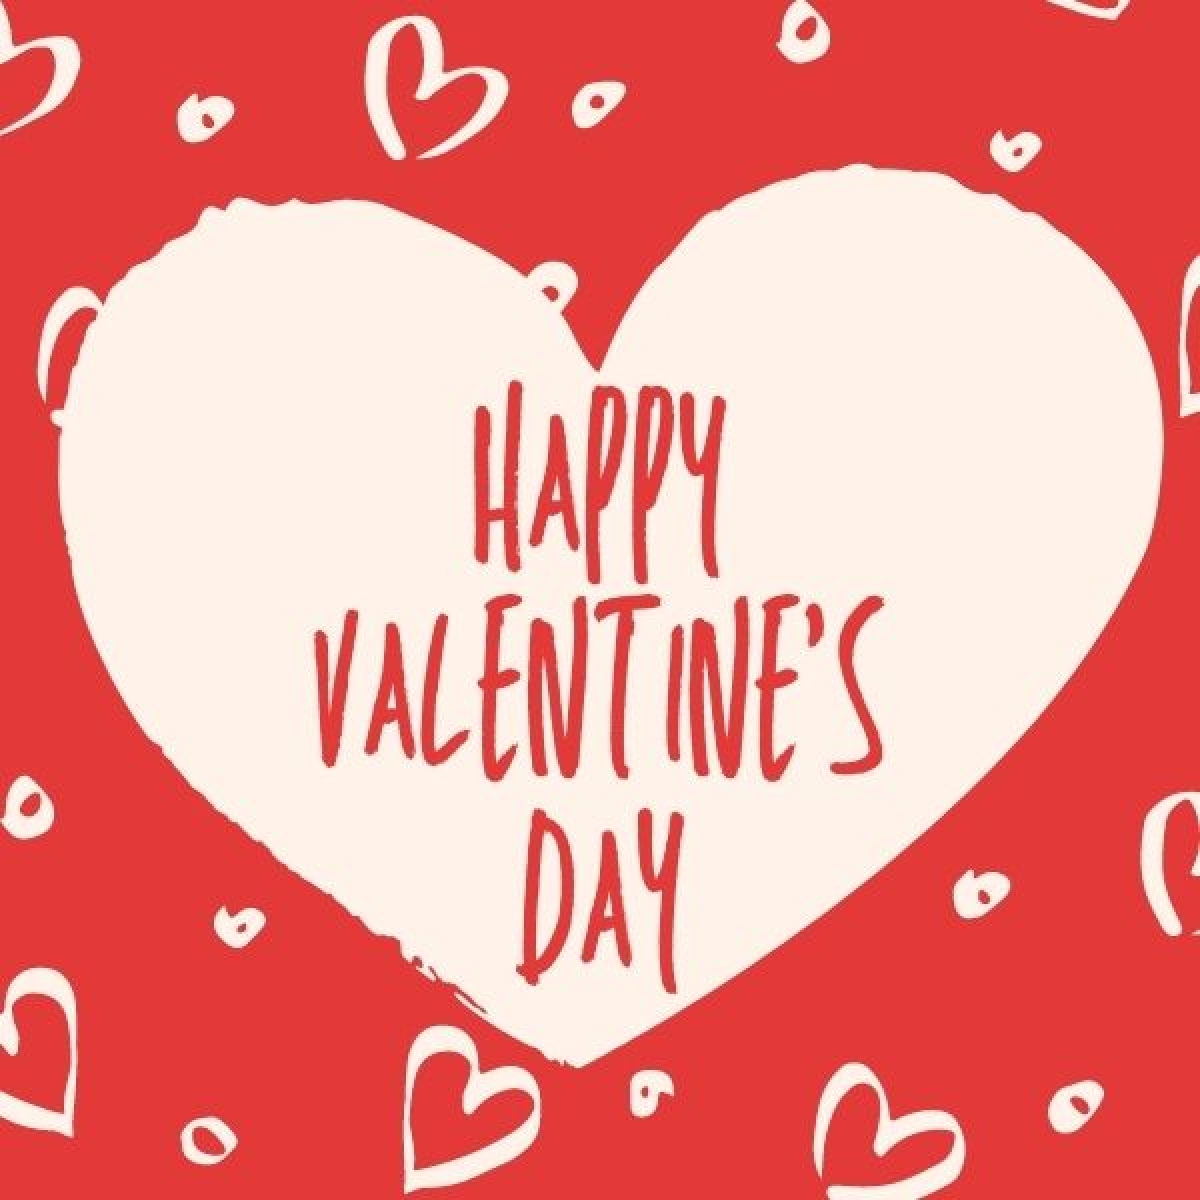 Send a (Virtual) Valentine's Card to Support the Carl Perkins Center eCards